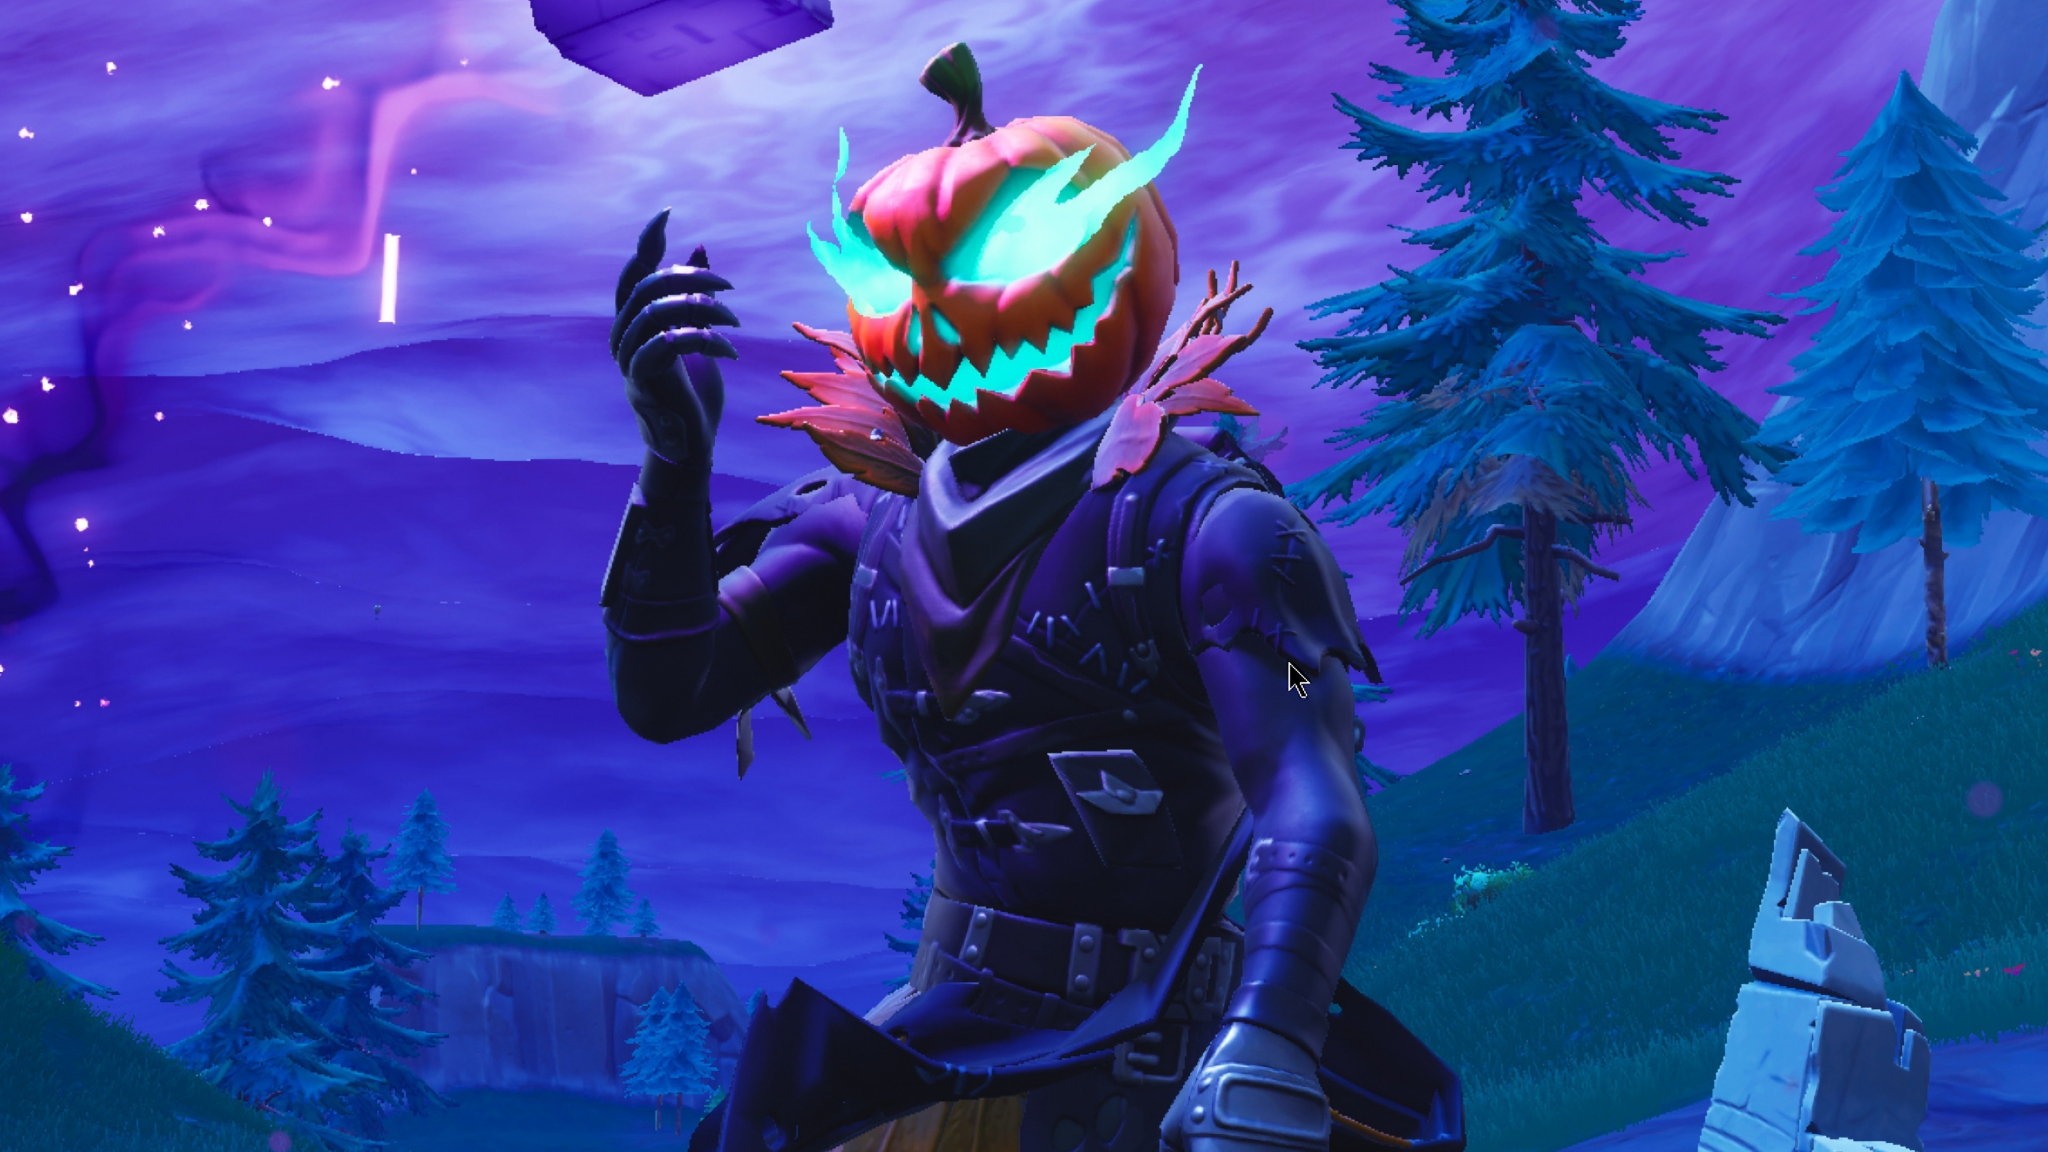 Download 48x1152 Wallpaper Hollowhead Video Game 18 Fortnite Battle Royale Dual Wide Widescreen 48x1152 Hd Image Background